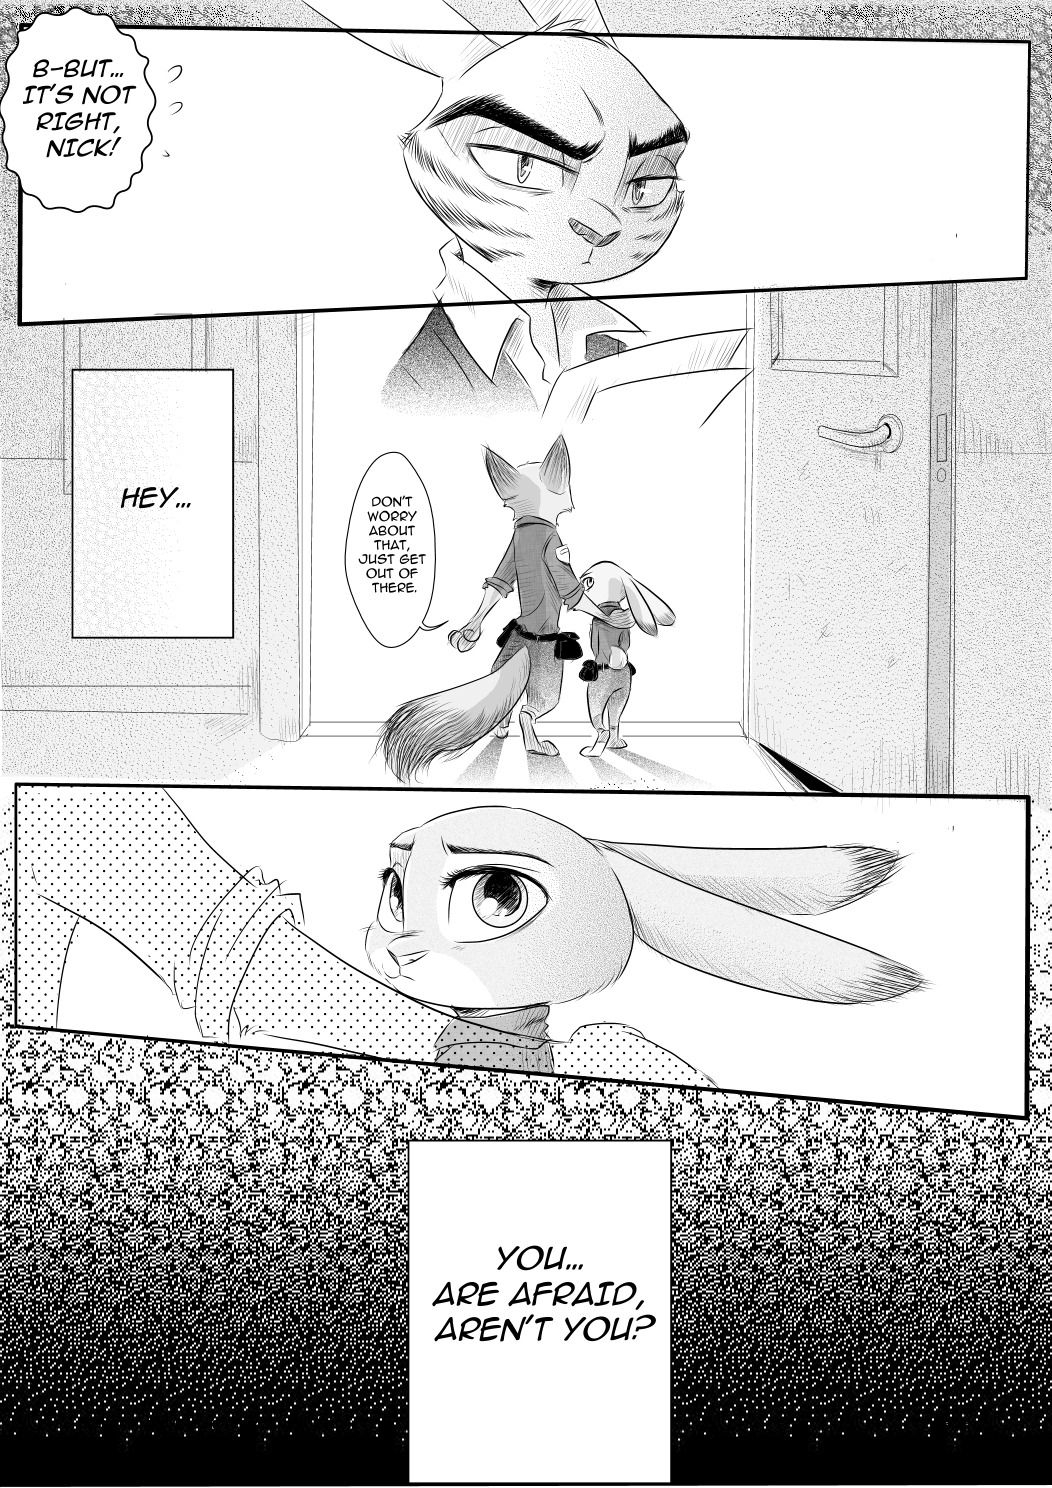 [Rem289] Black♡Jack V - The Good and The Bad (Zootopia) (English) 12